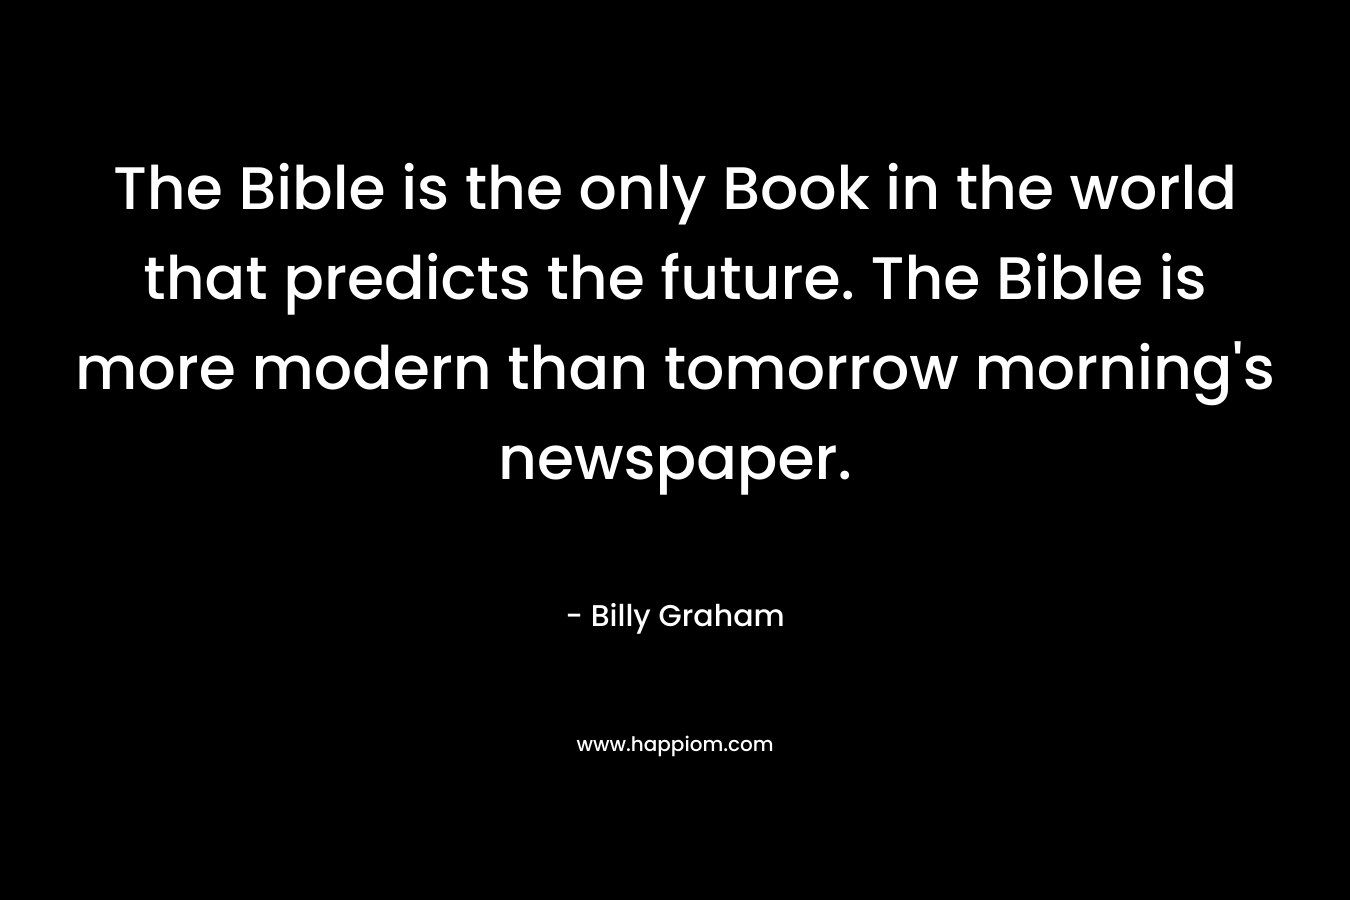 The Bible is the only Book in the world that predicts the future. The Bible is more modern than tomorrow morning’s newspaper. – Billy Graham